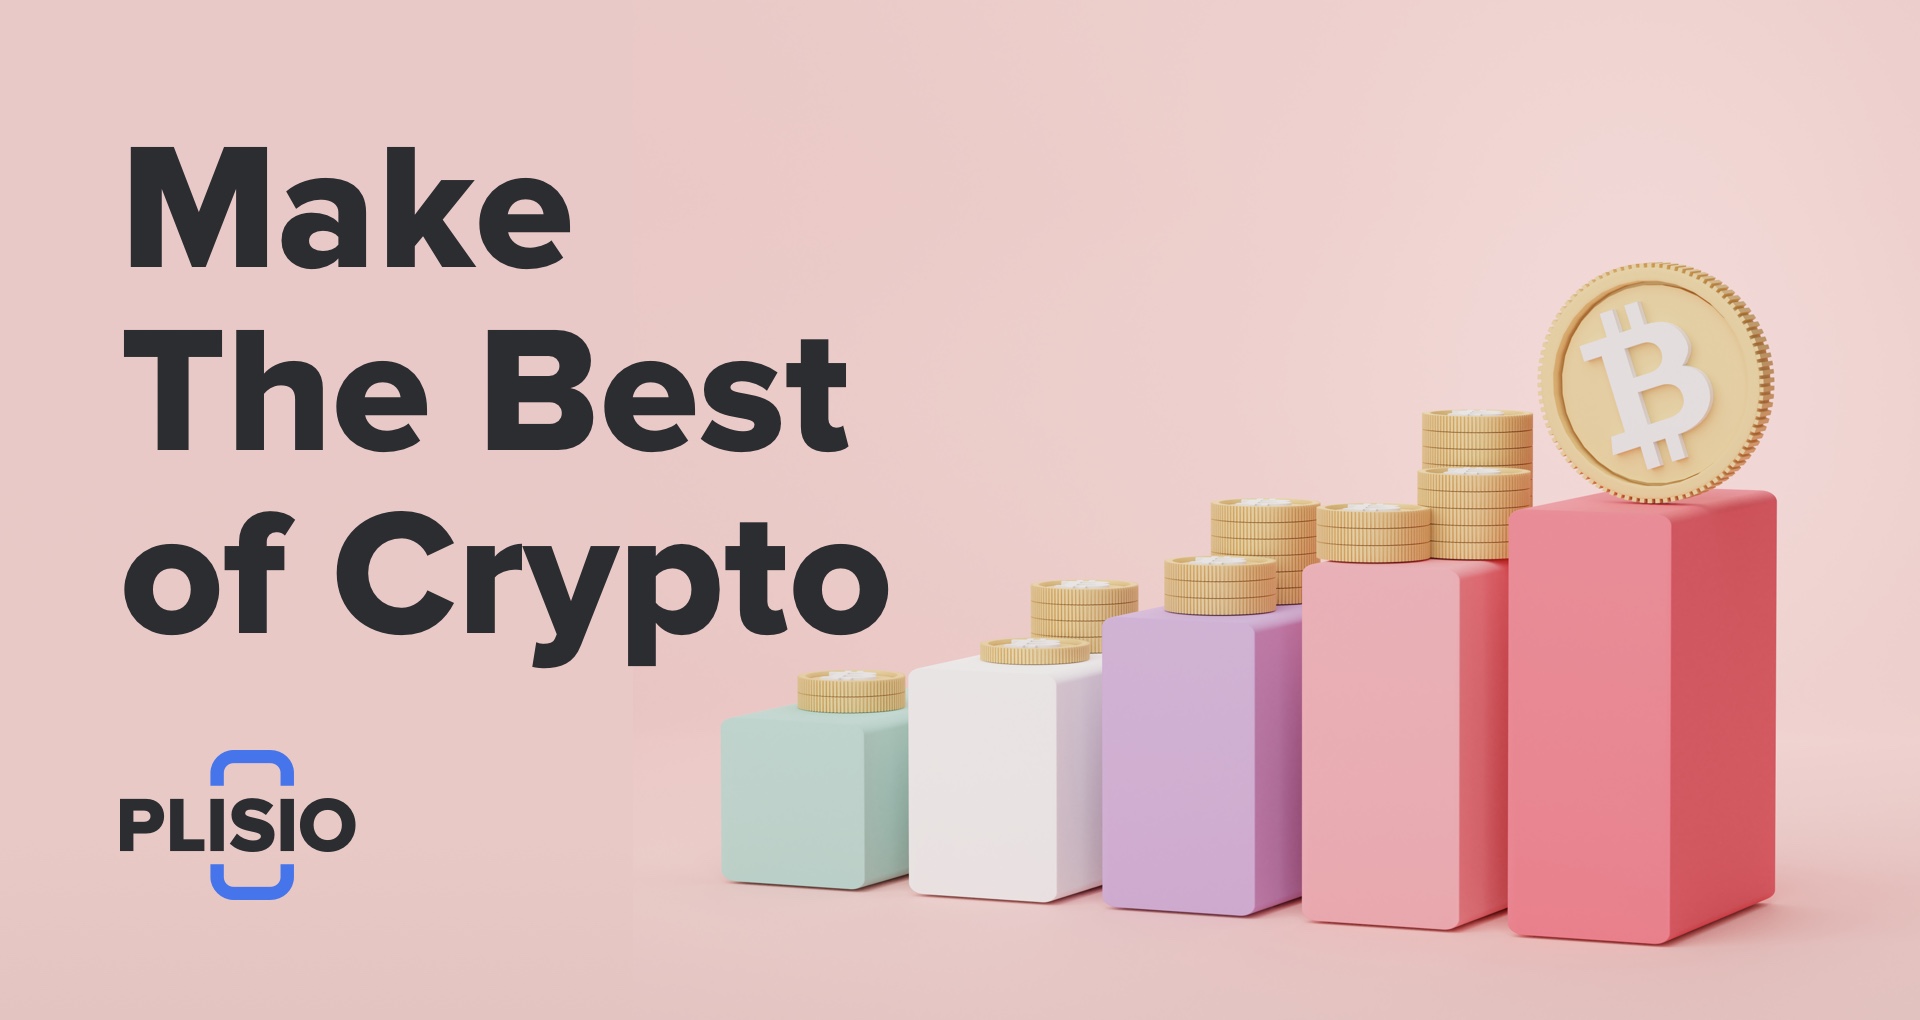 How to Make the Best of Crypto for Your Business